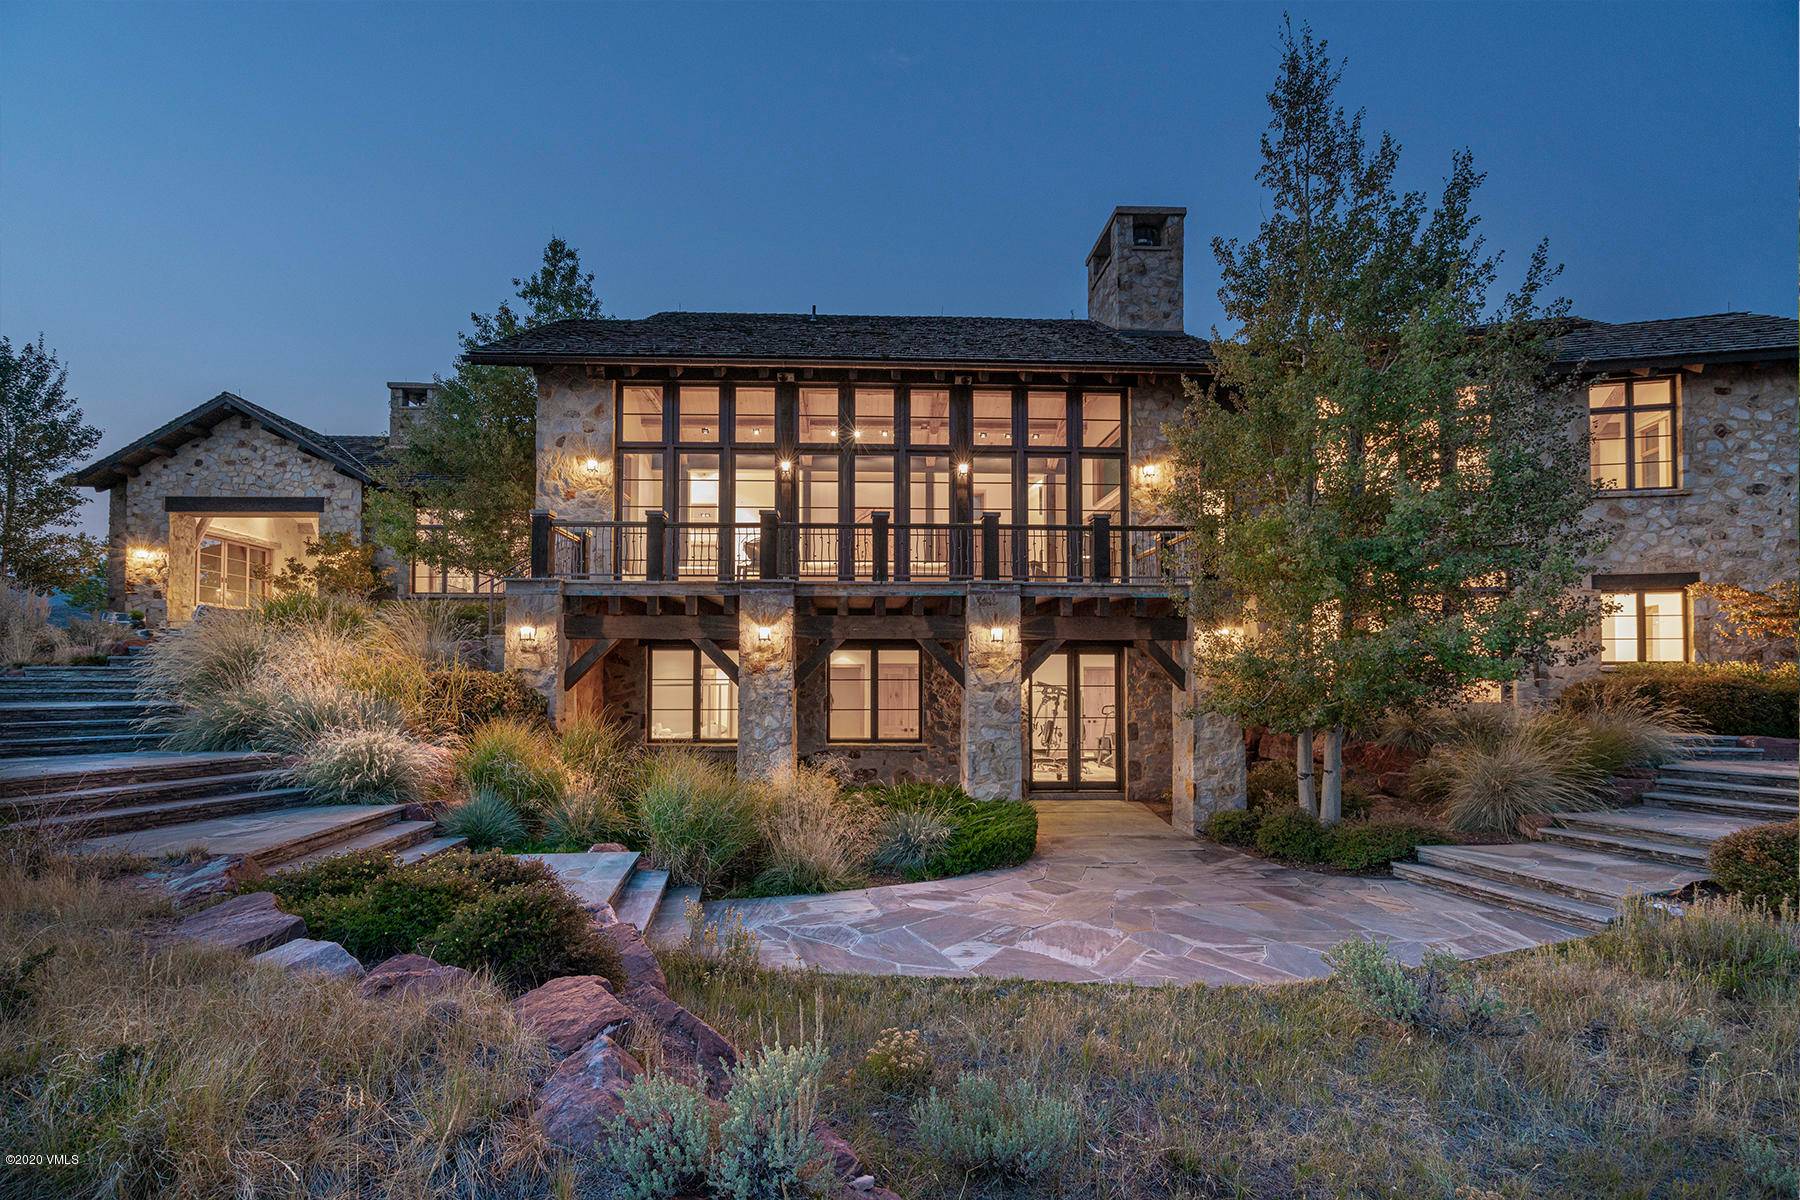 In the gated community of Mountain Star, high above Avon, Colorado in a sea of native sagebrush and aspen, 587 Paintbrush is the epitome of modern Tuscan hillside chic with ...